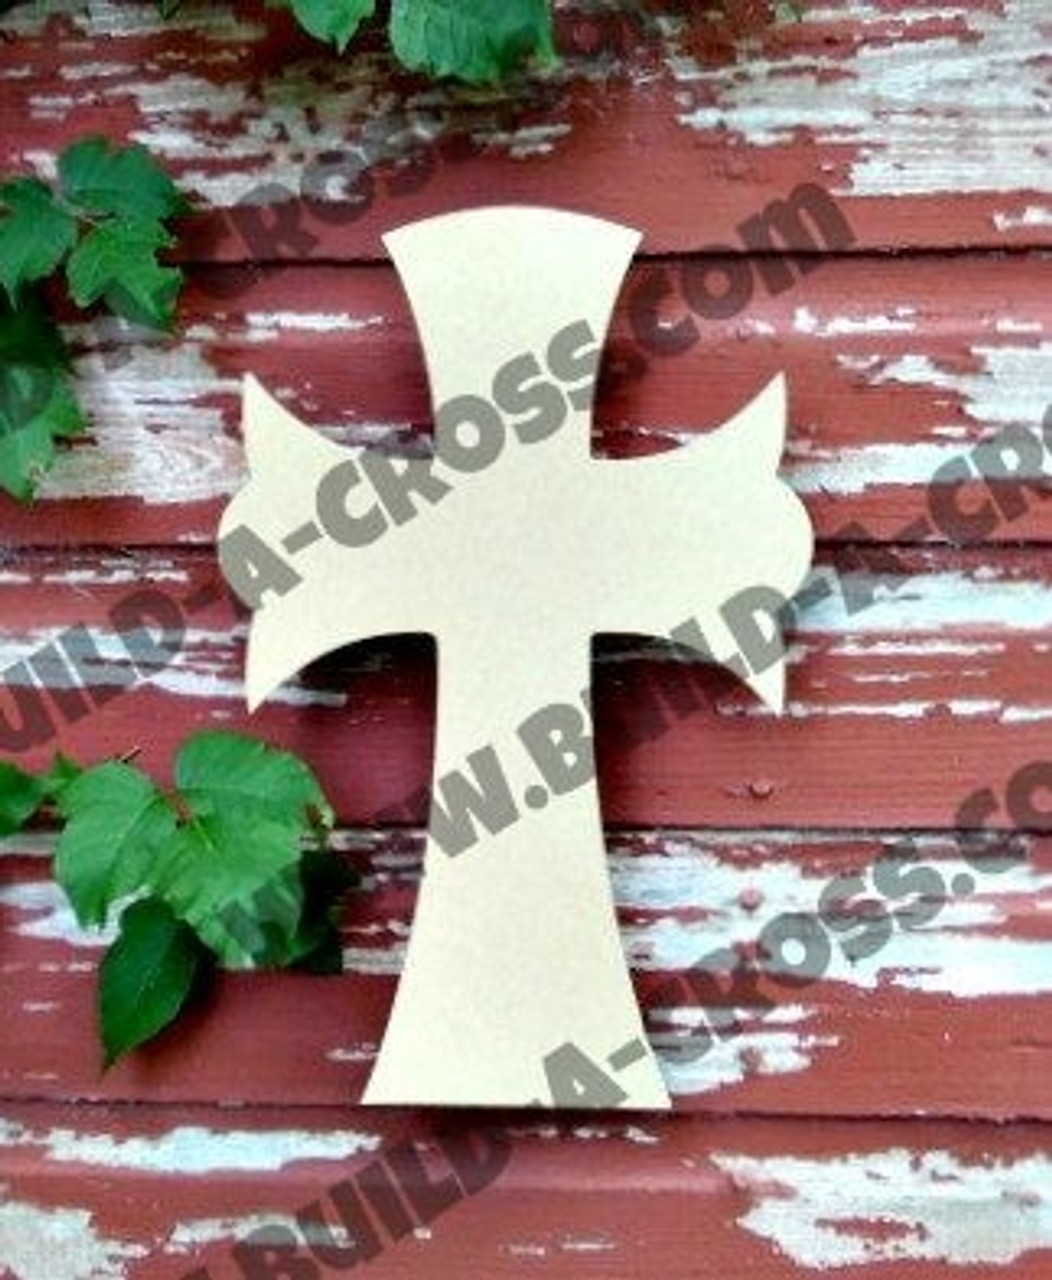 Unfinished Wooden Crosses for Painting and Crafting - 9 H x 6.5